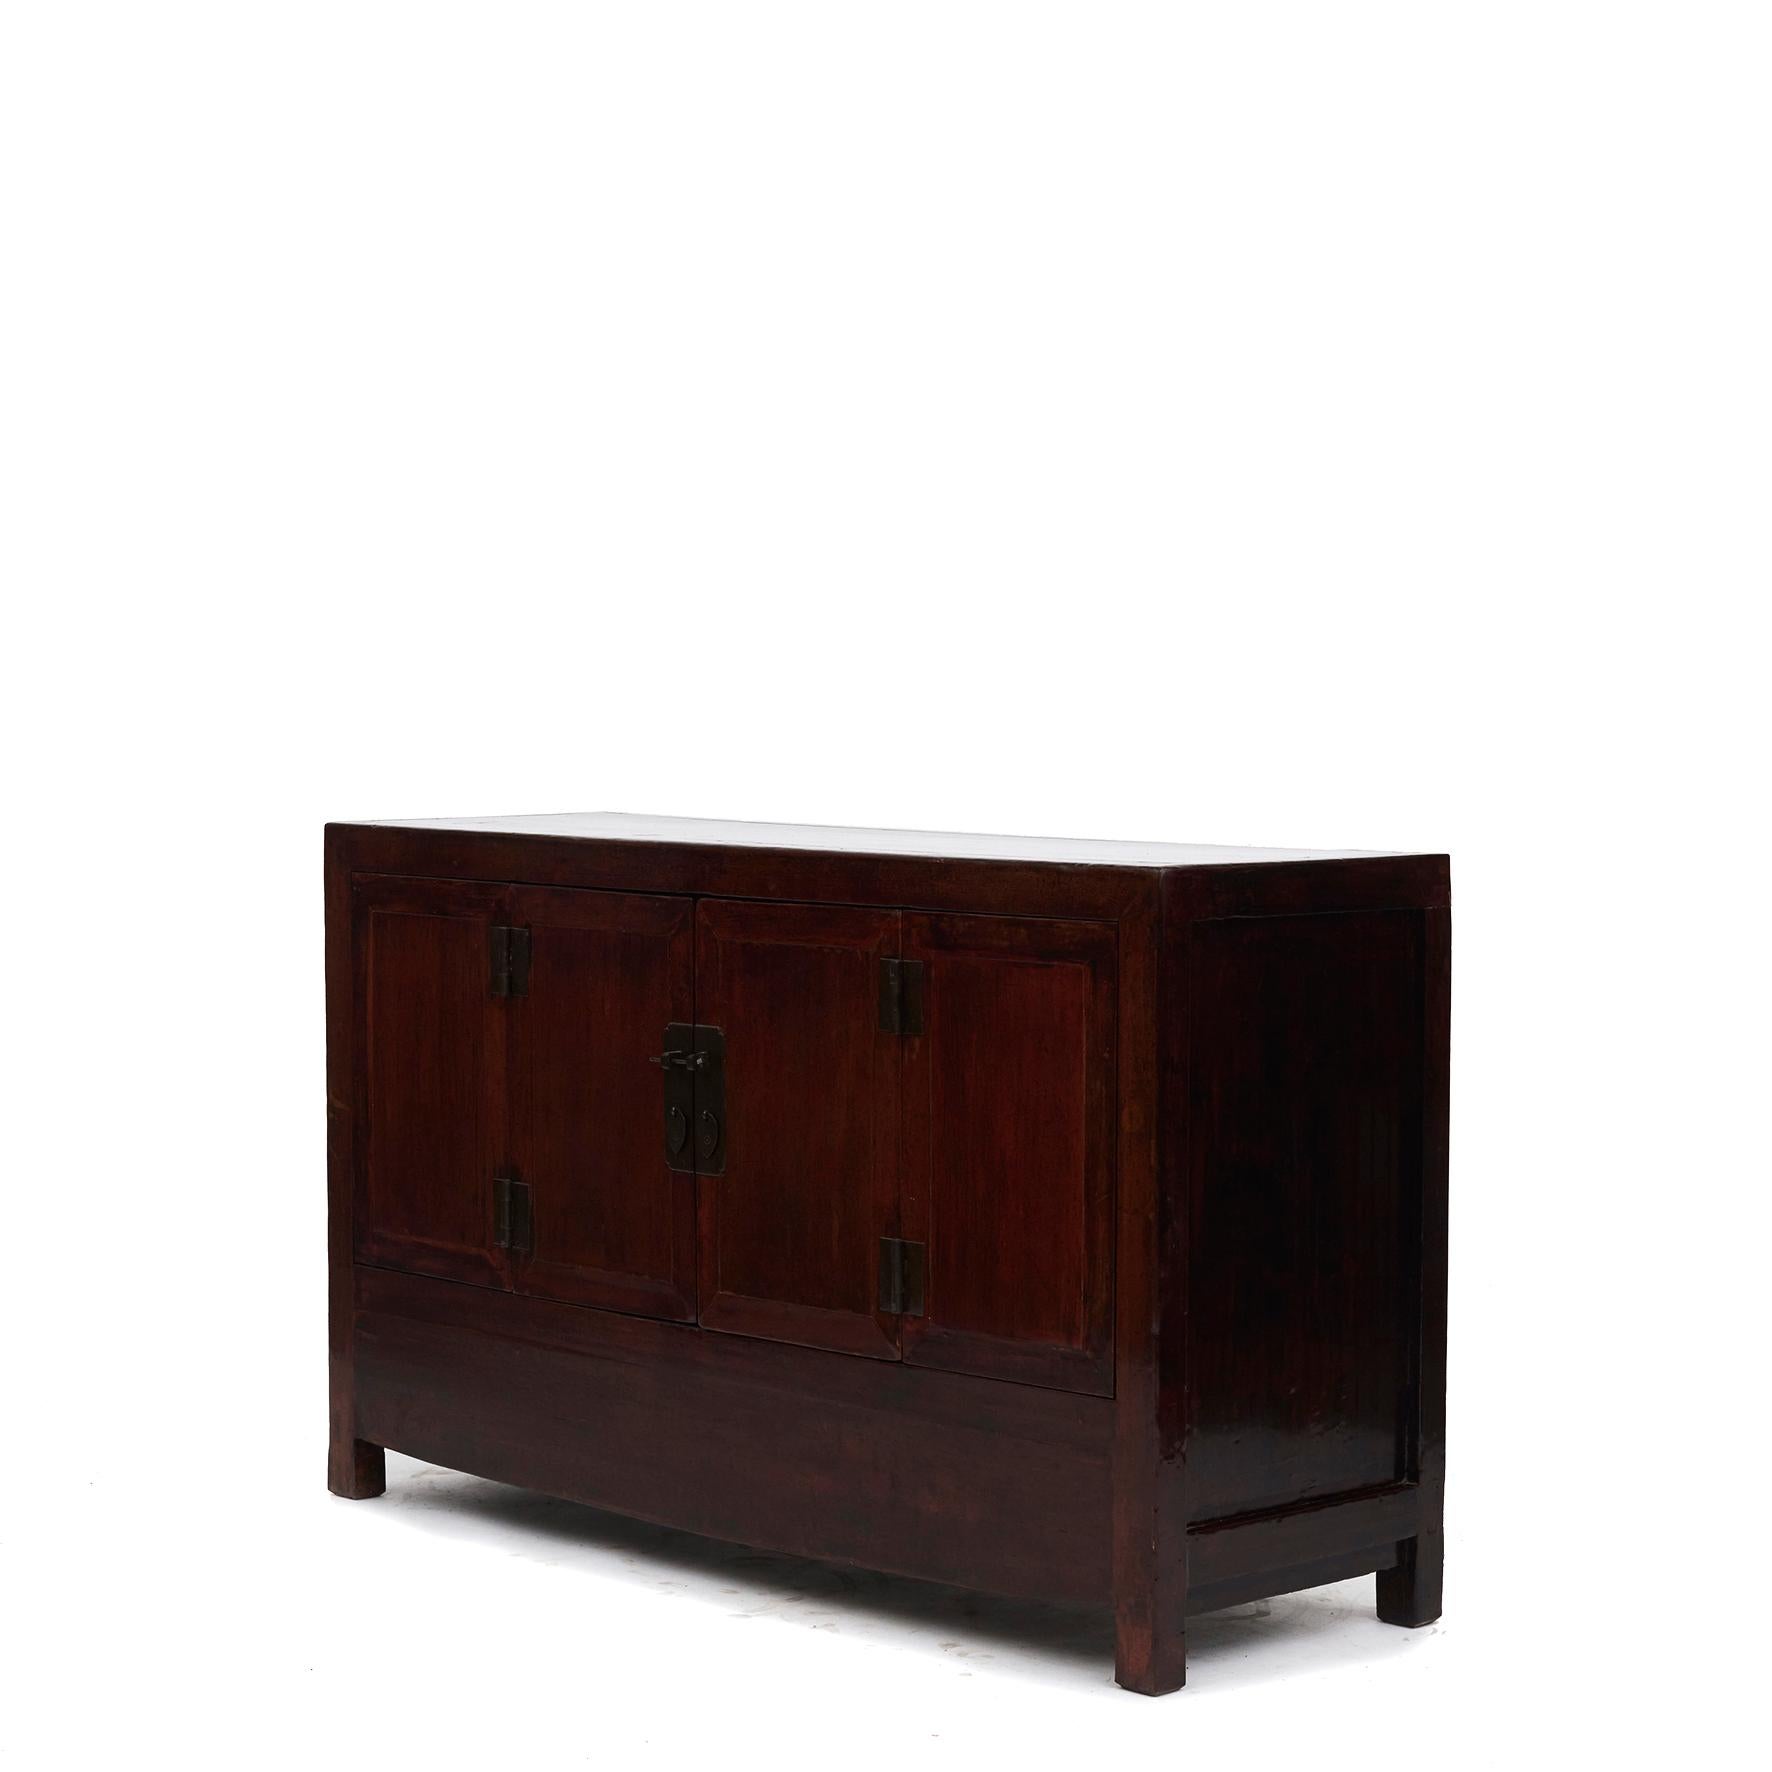 Sideboard with original red lacquer on the front and top, black lacquer on the sides. Pair of doors which can be opened.
The lacquer colors have a natural good patina, highlighted by a clear lacquer surface finish.

Shandong Province, China 1860